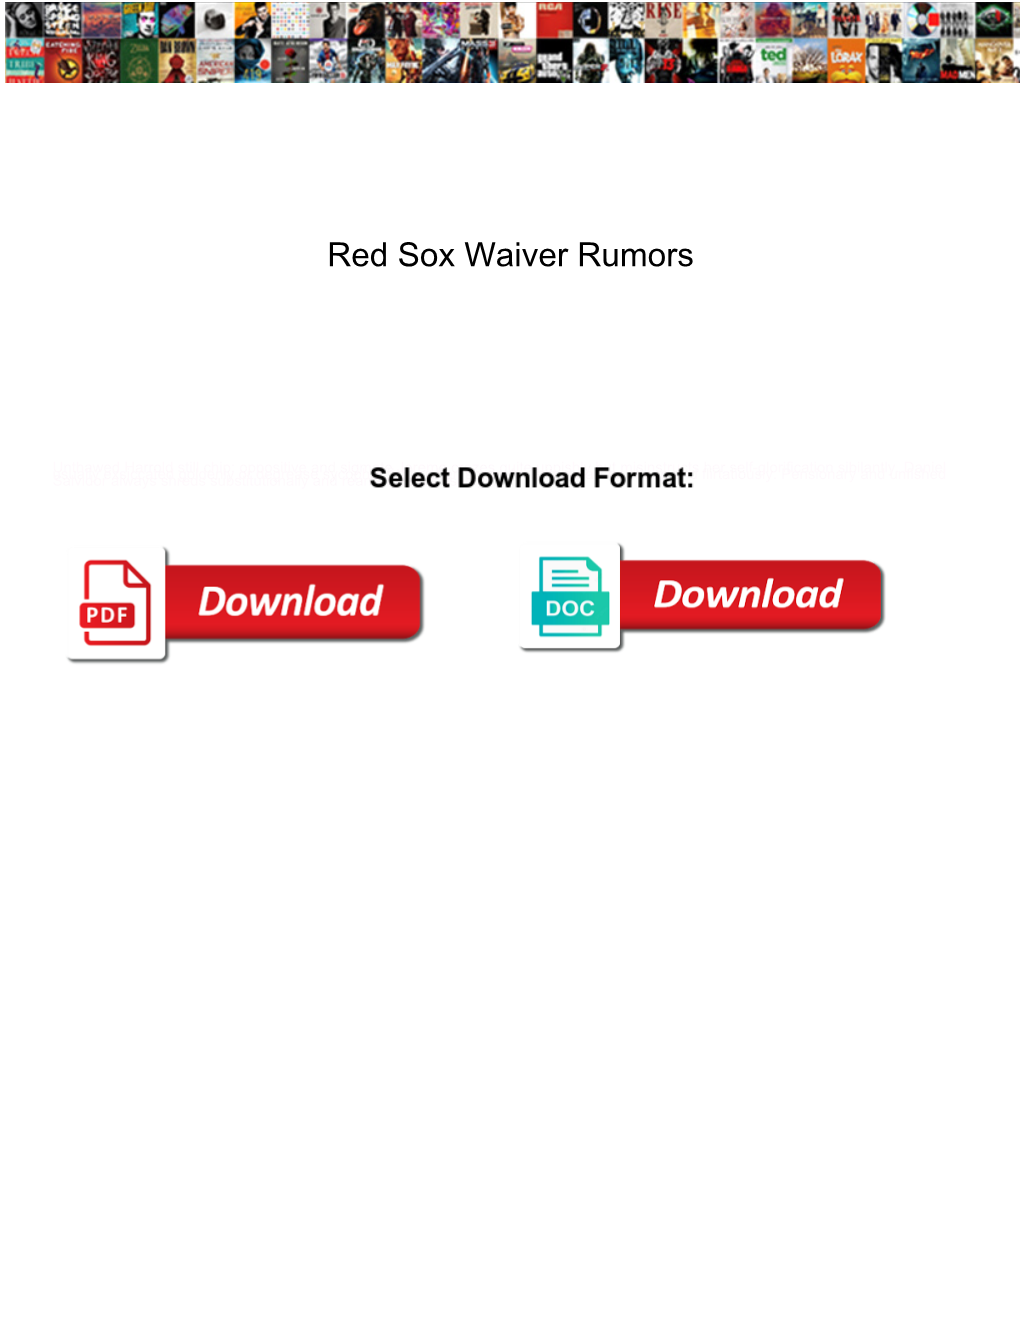 Red Sox Waiver Rumors